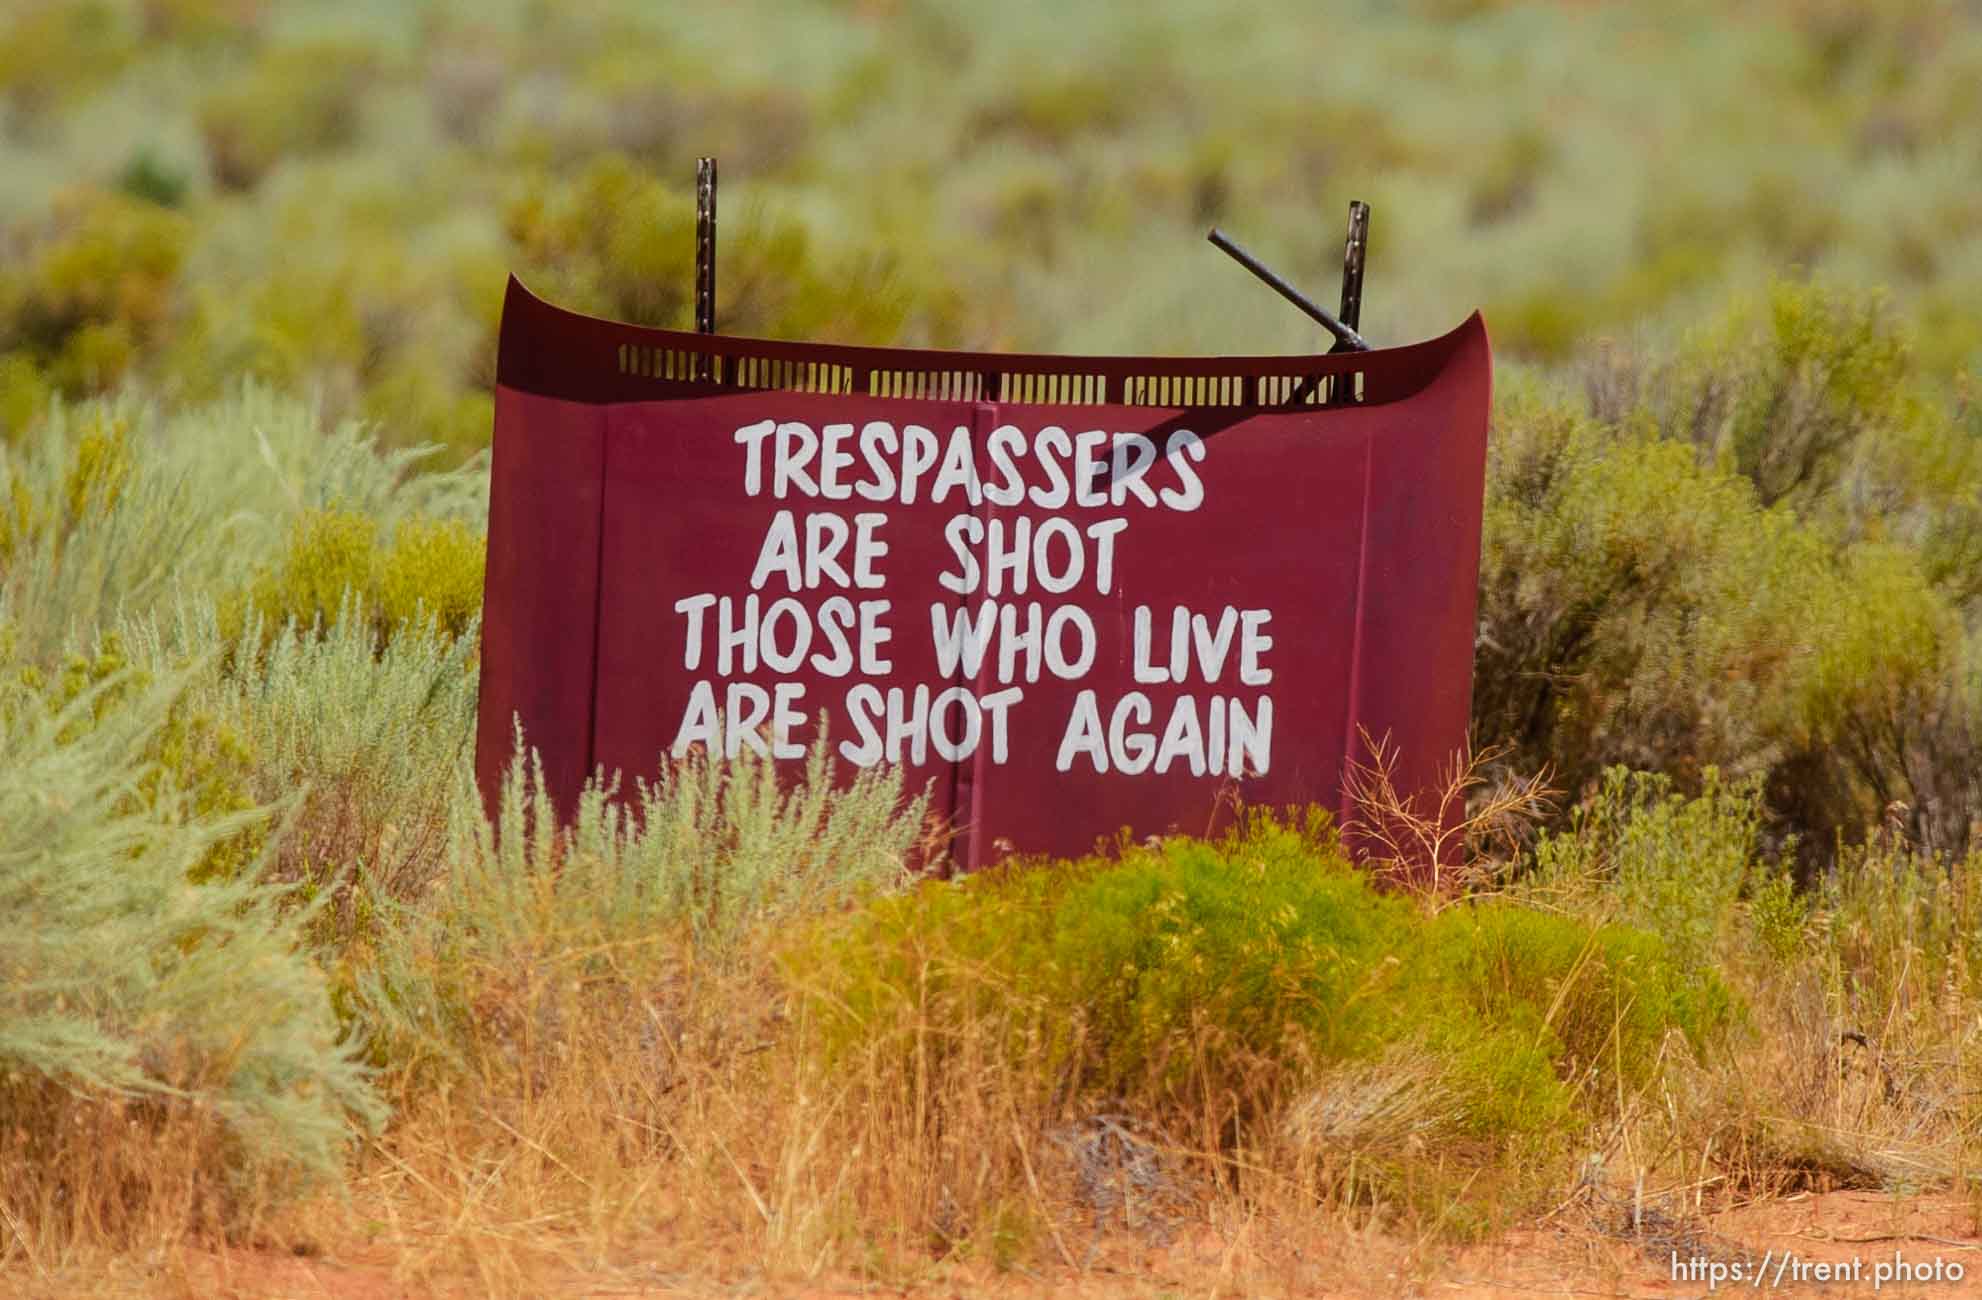 Trespassers are shot those who live are shot again